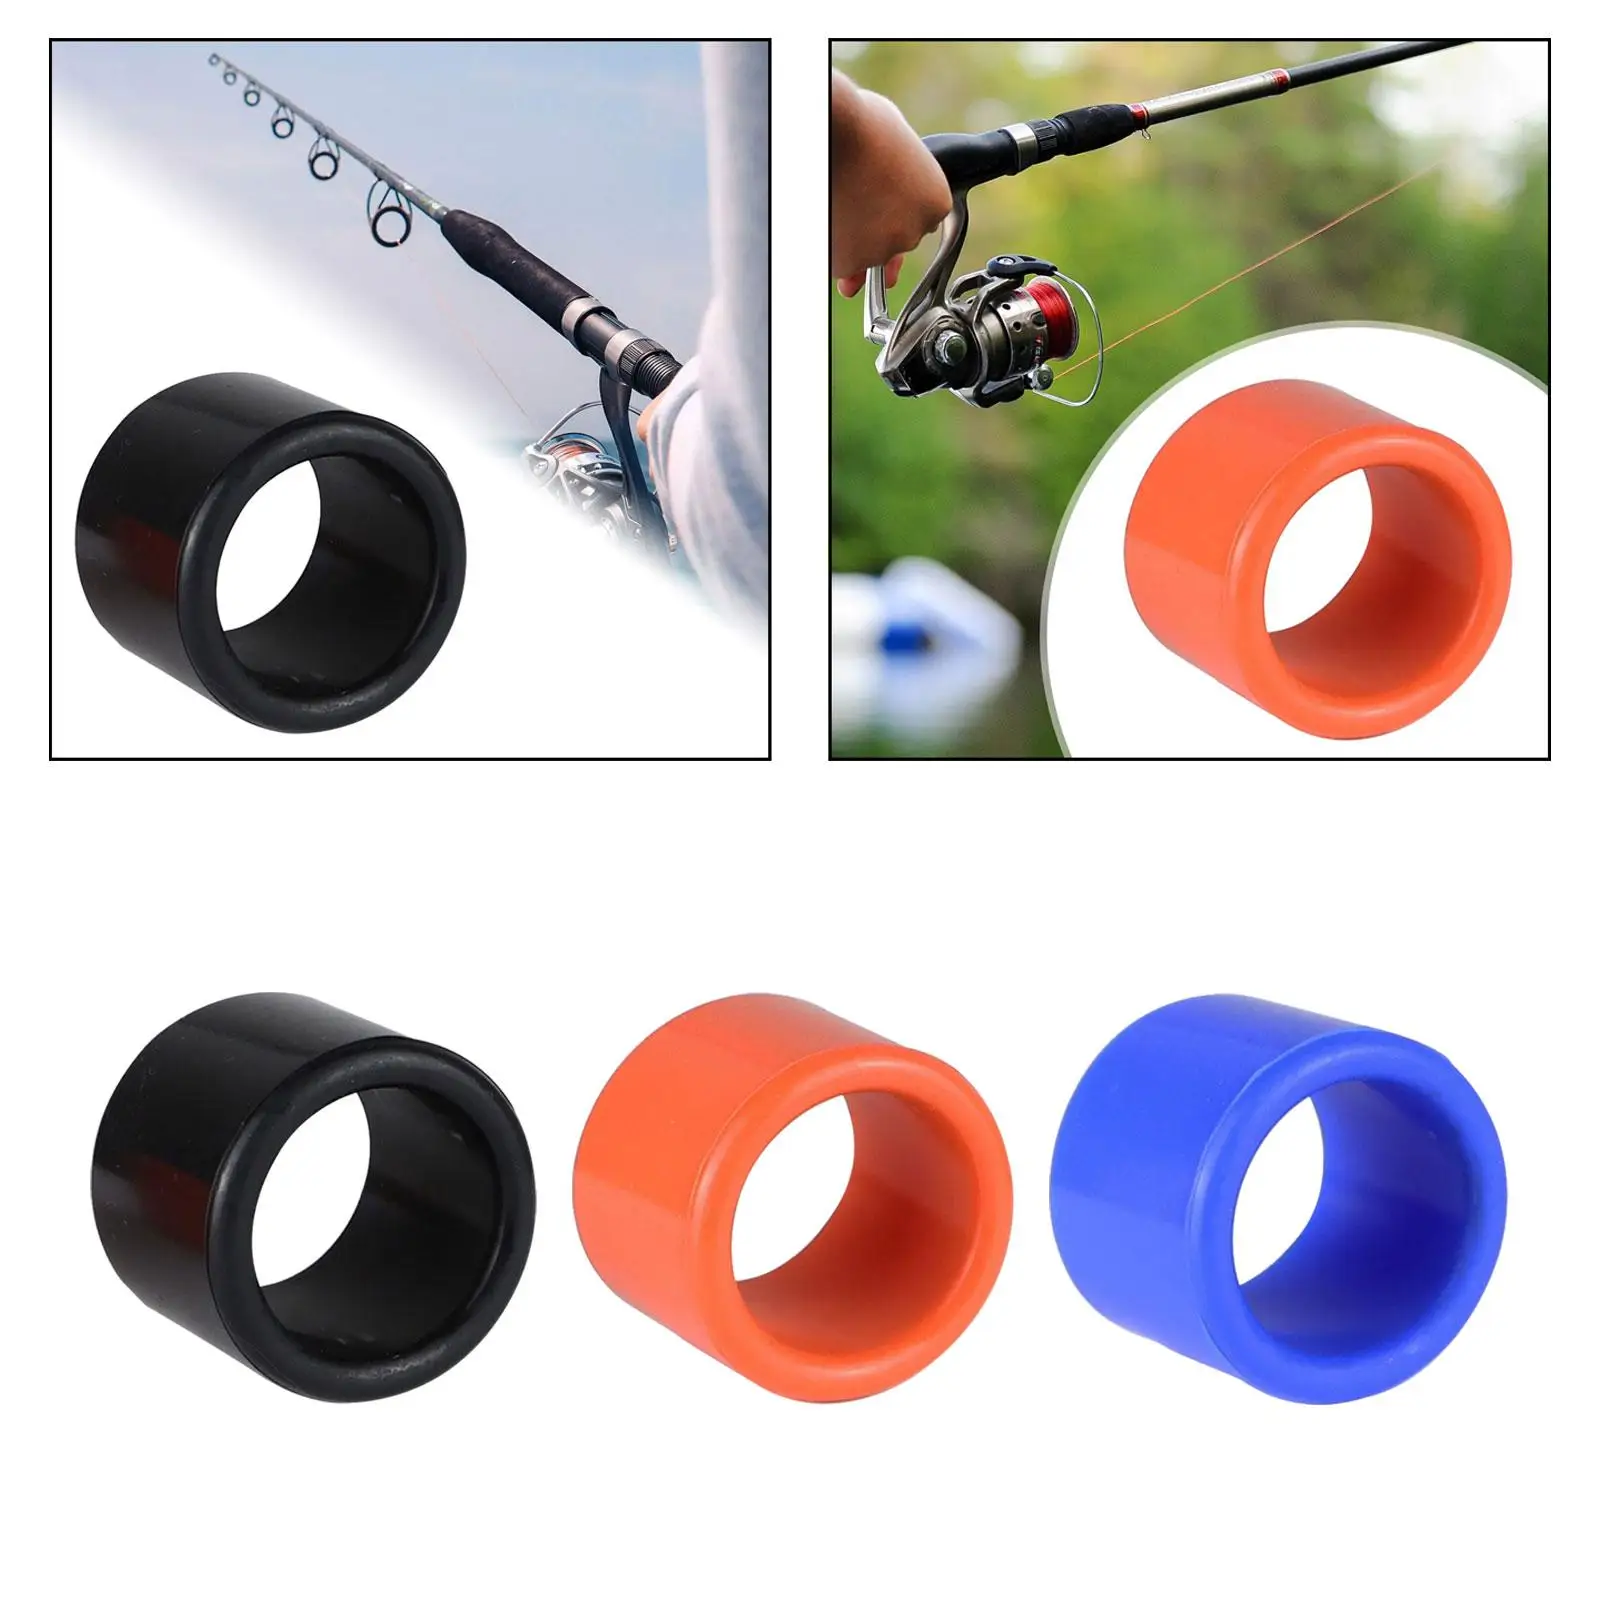 Pole Rack Insert Protector Replacement Tackle Cap for Rod Holder Sturdy Silicone Fly Fishing for Rod Holder Pole Rest Protection